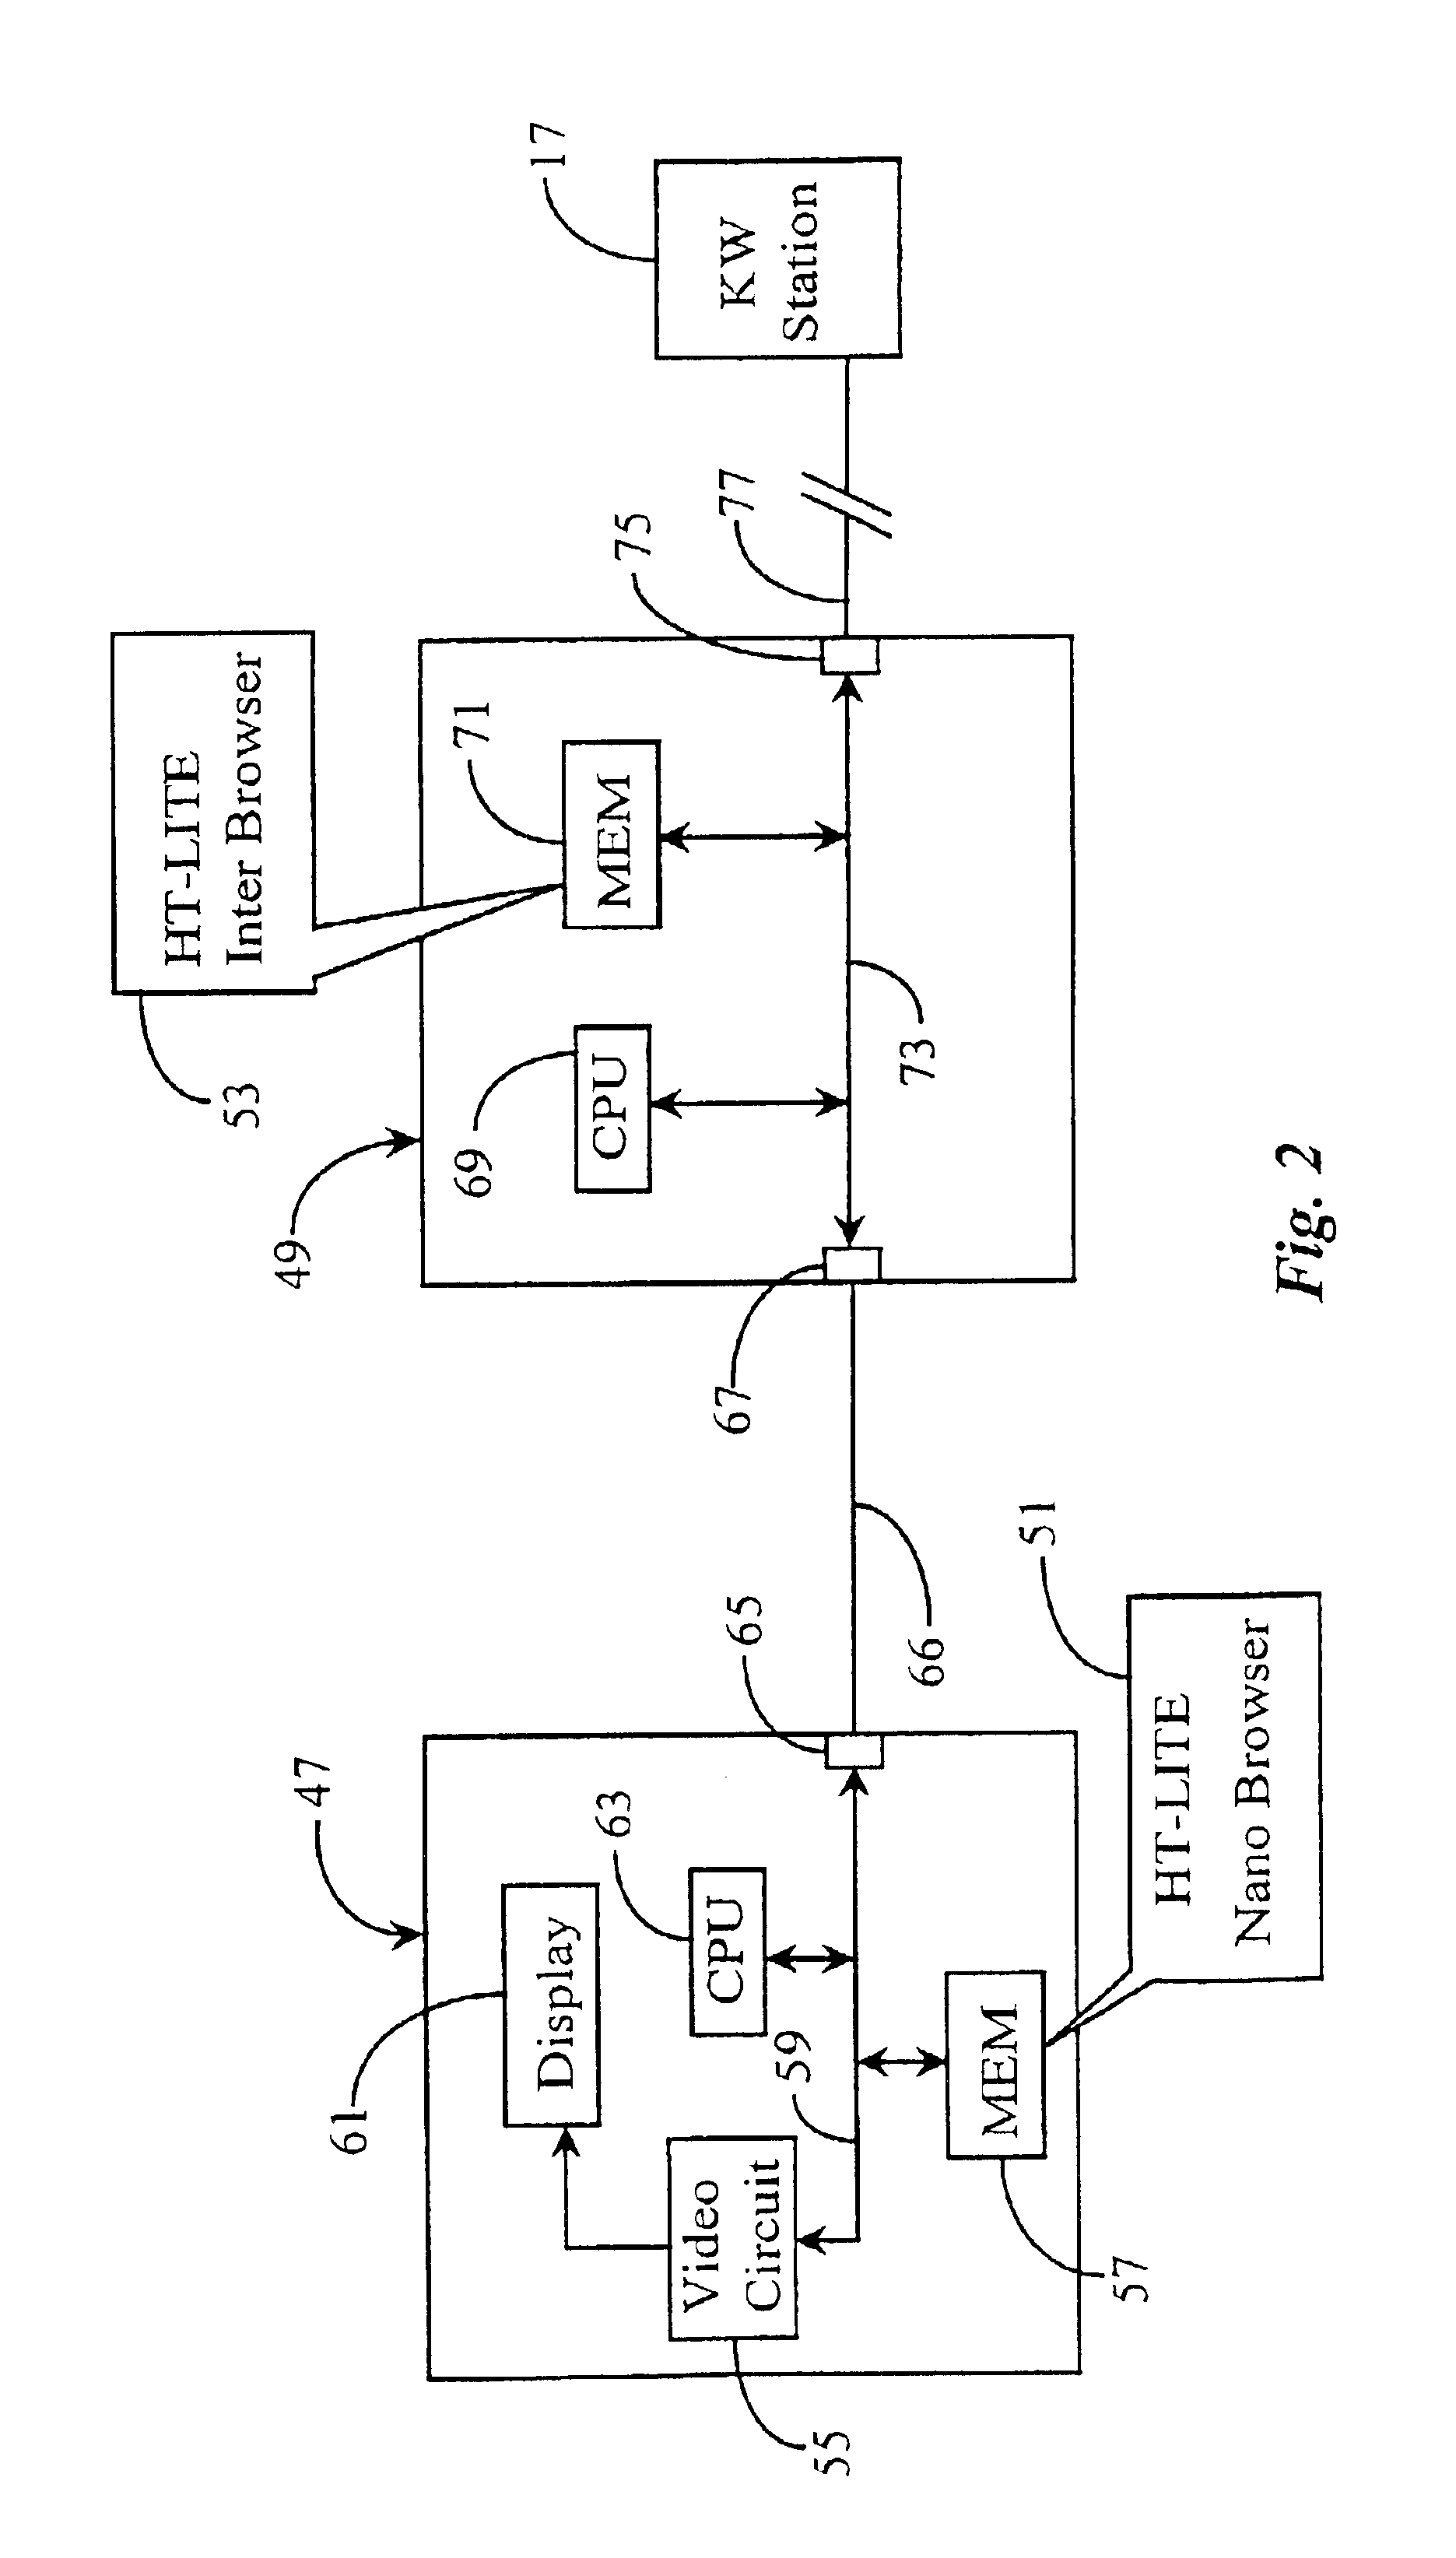 Method and apparatus for extended management of state and interaction of a remote knowledge worker from a contact center